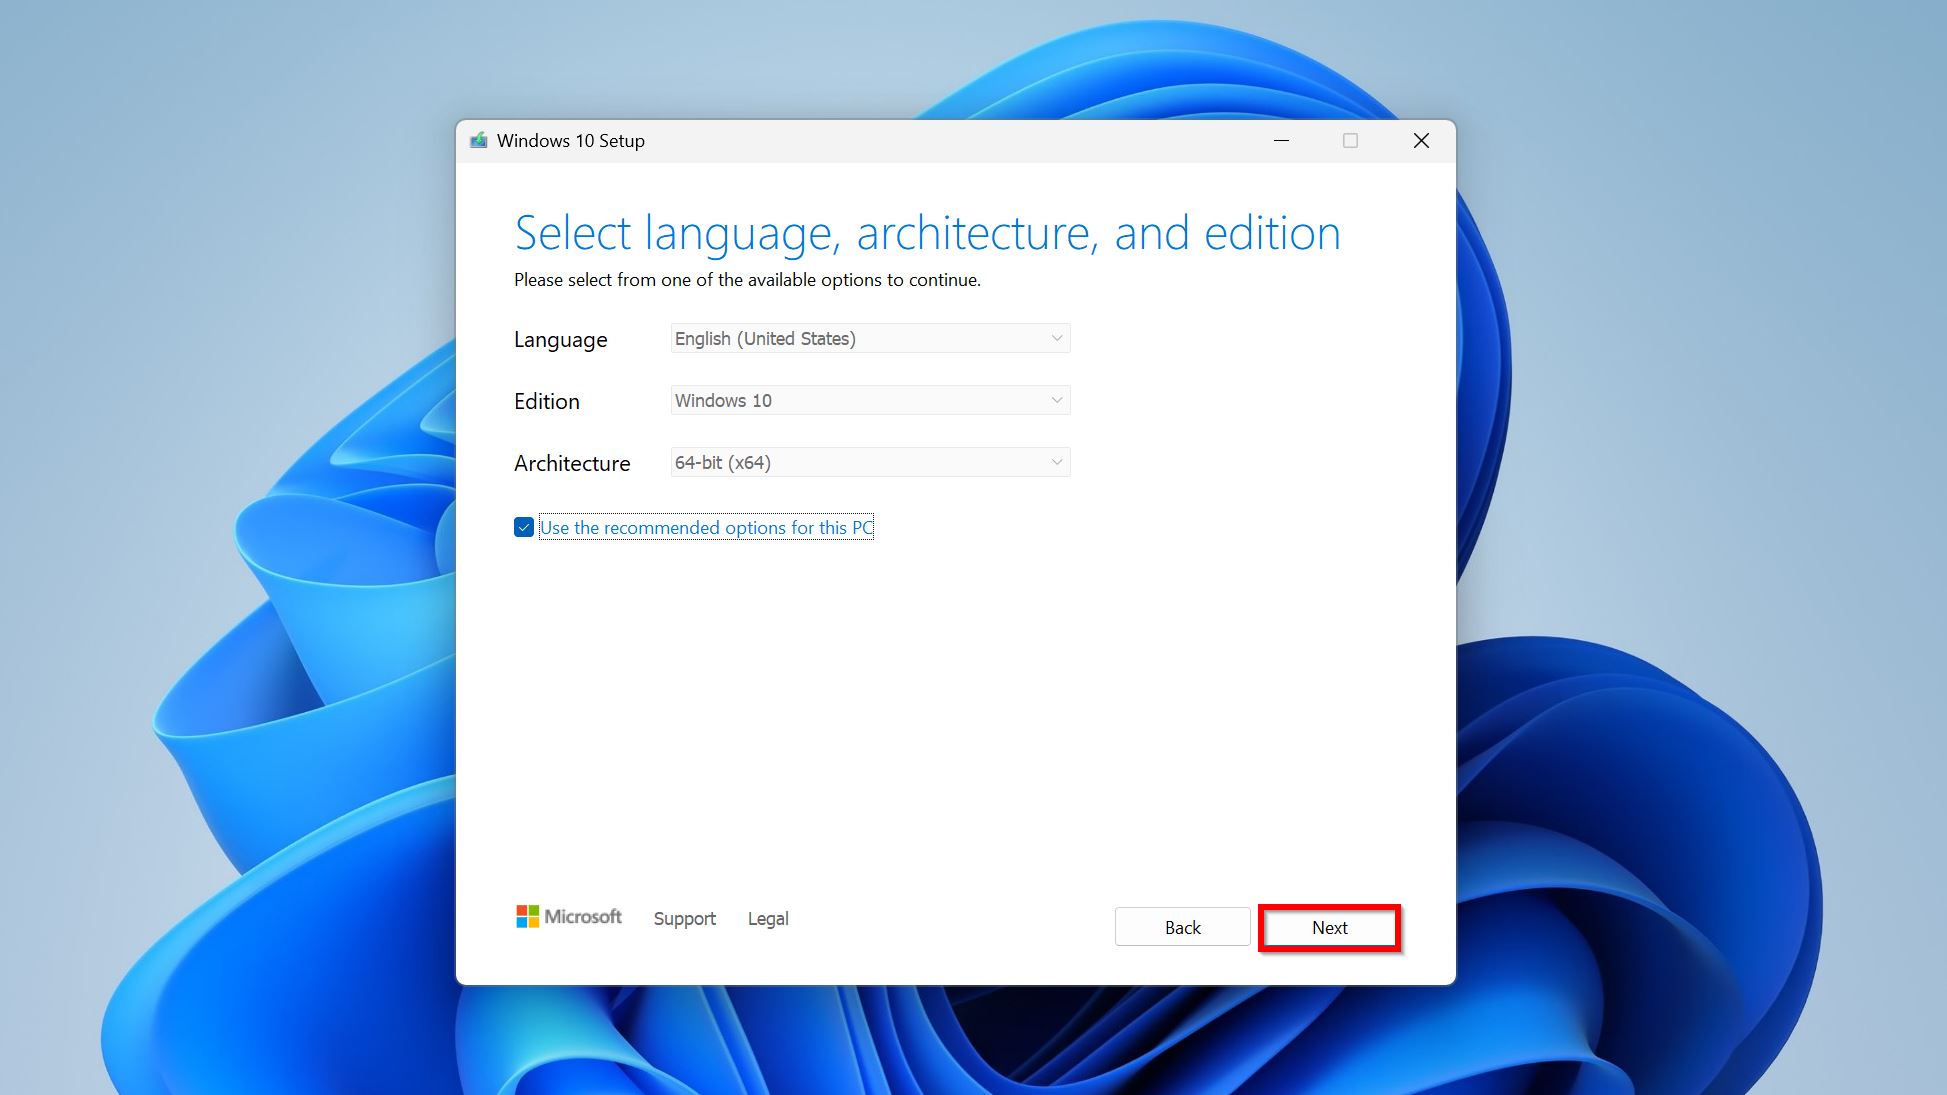 Windows language and architecture selection.